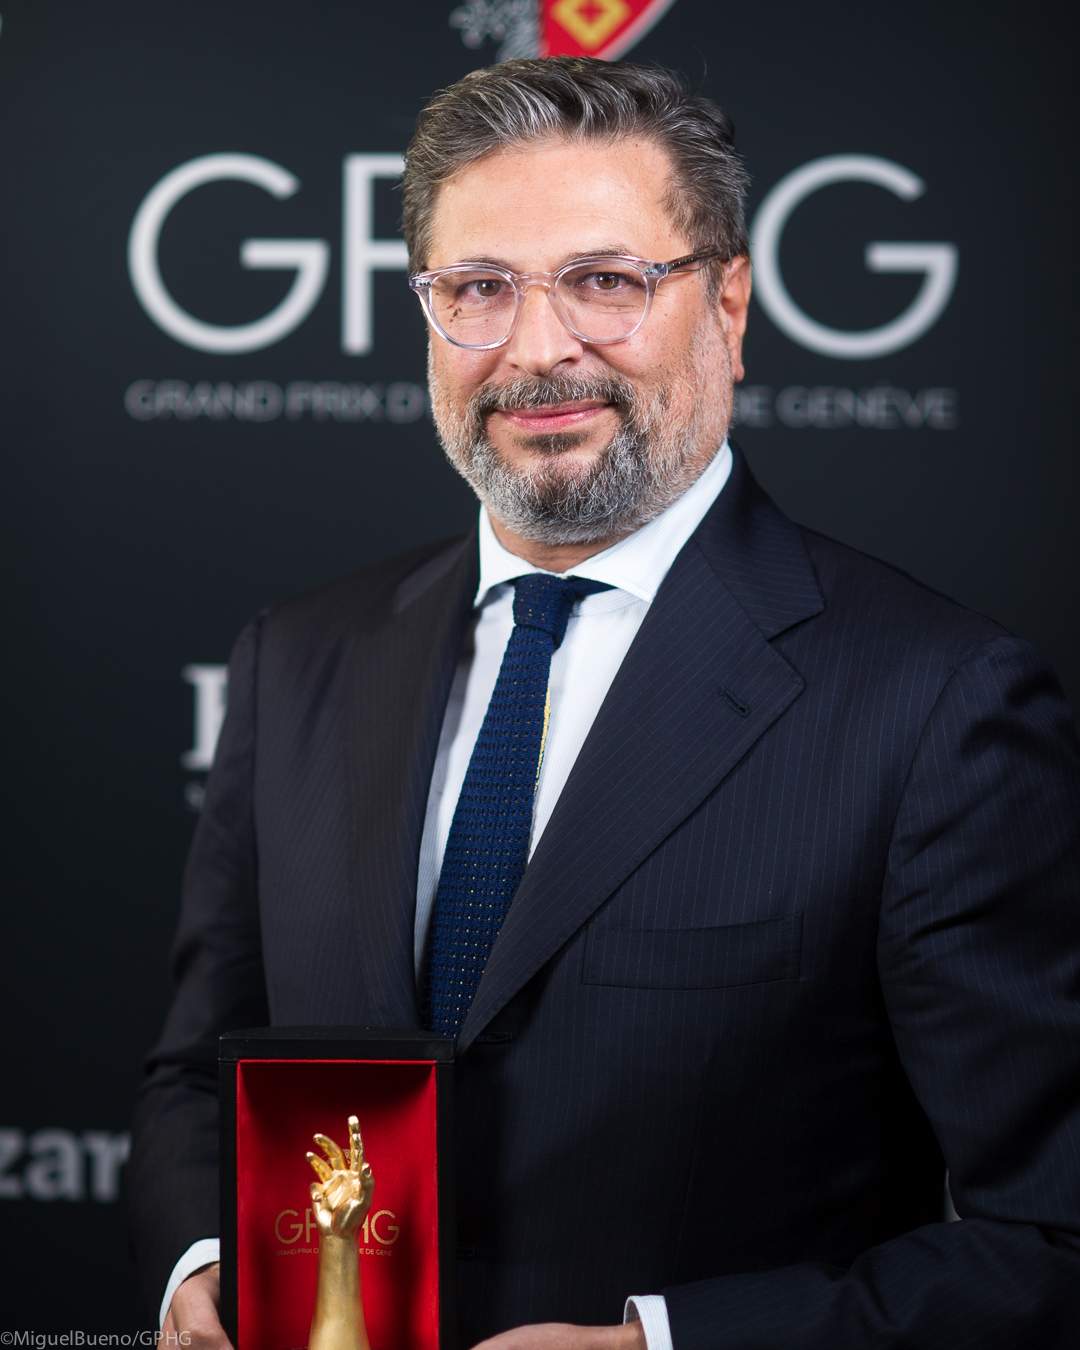 Guido Terreni, CEO  of Parmigiani Fleurier, winner of the Ladies’ Watch Prize 2022